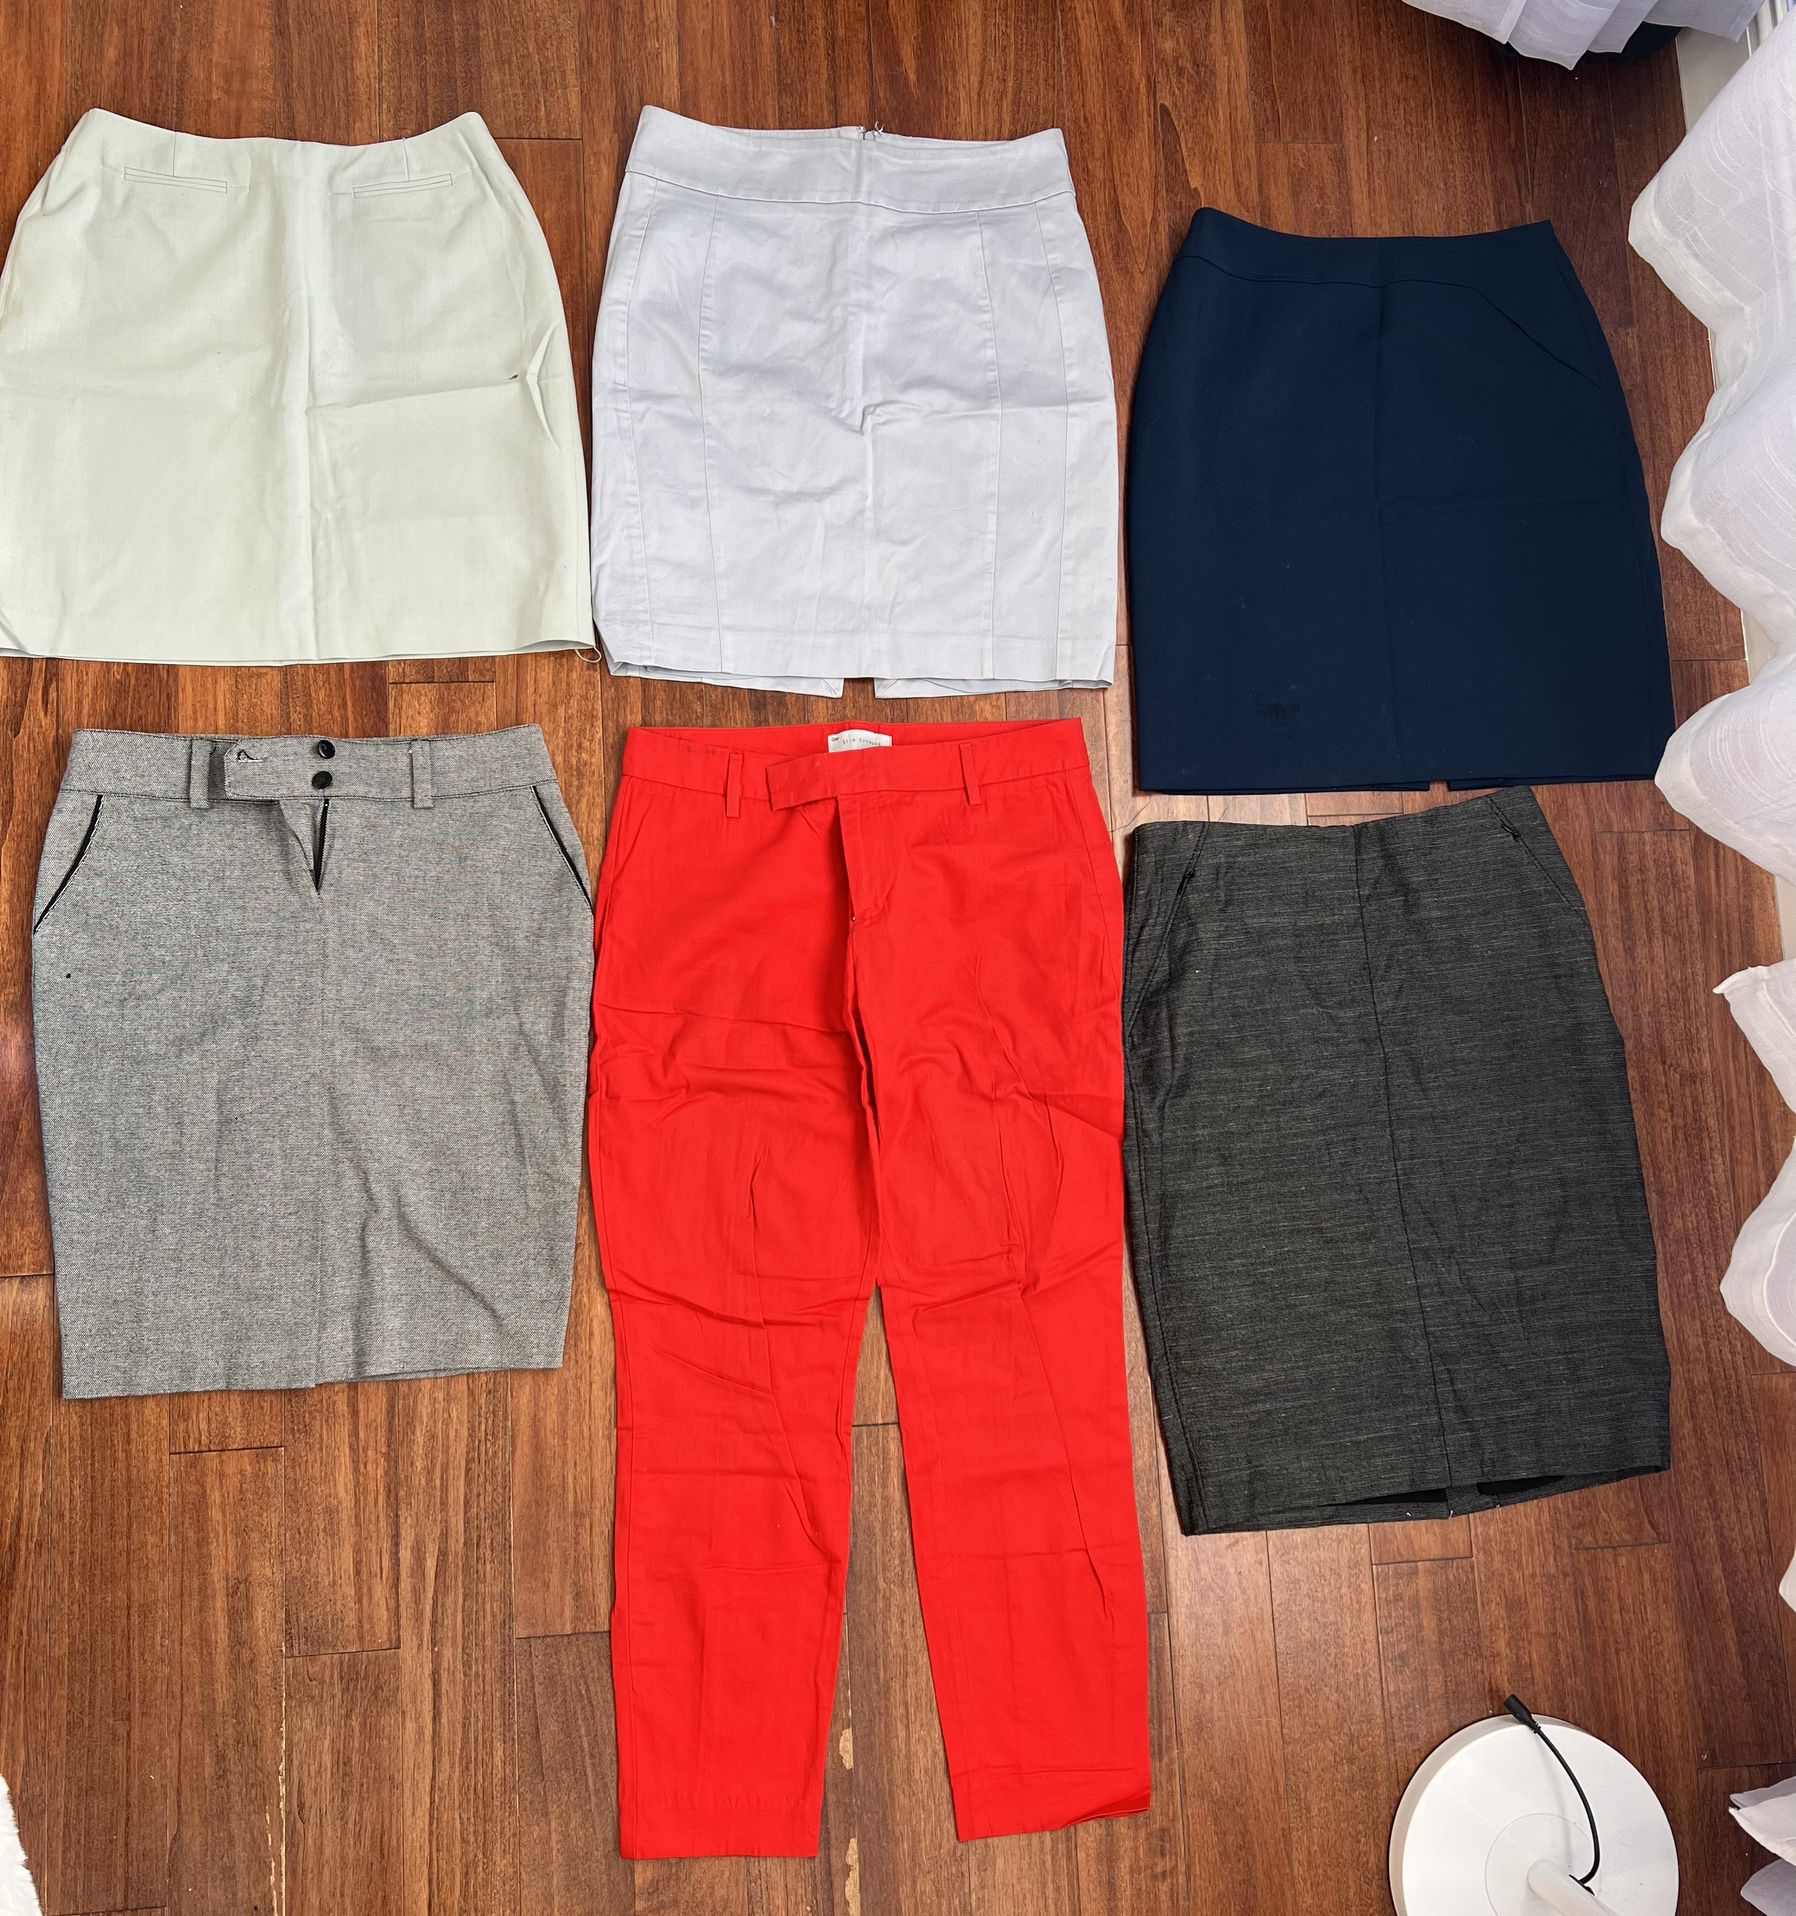 DRESSY PENCIL SKIRTS & PANTS (GREAT CONDITION) - $20